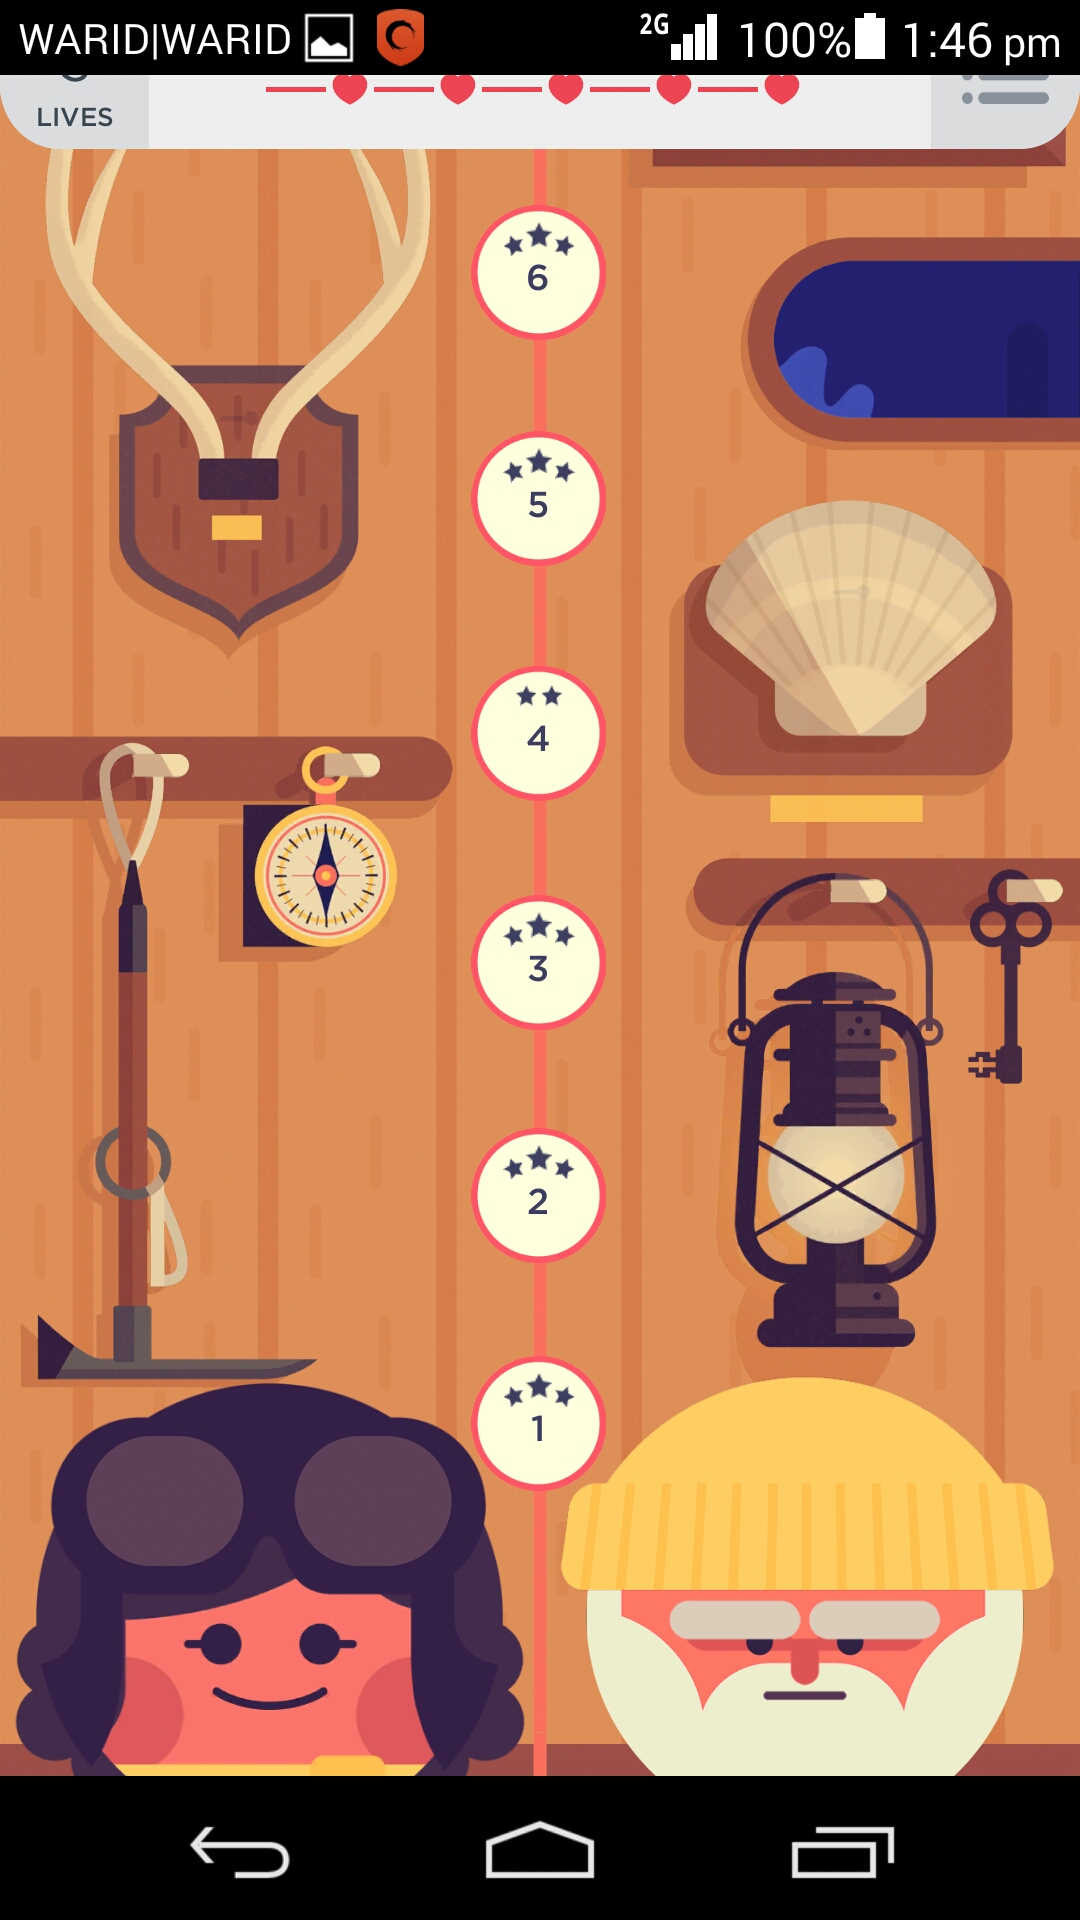 Two Dots Android Game Review